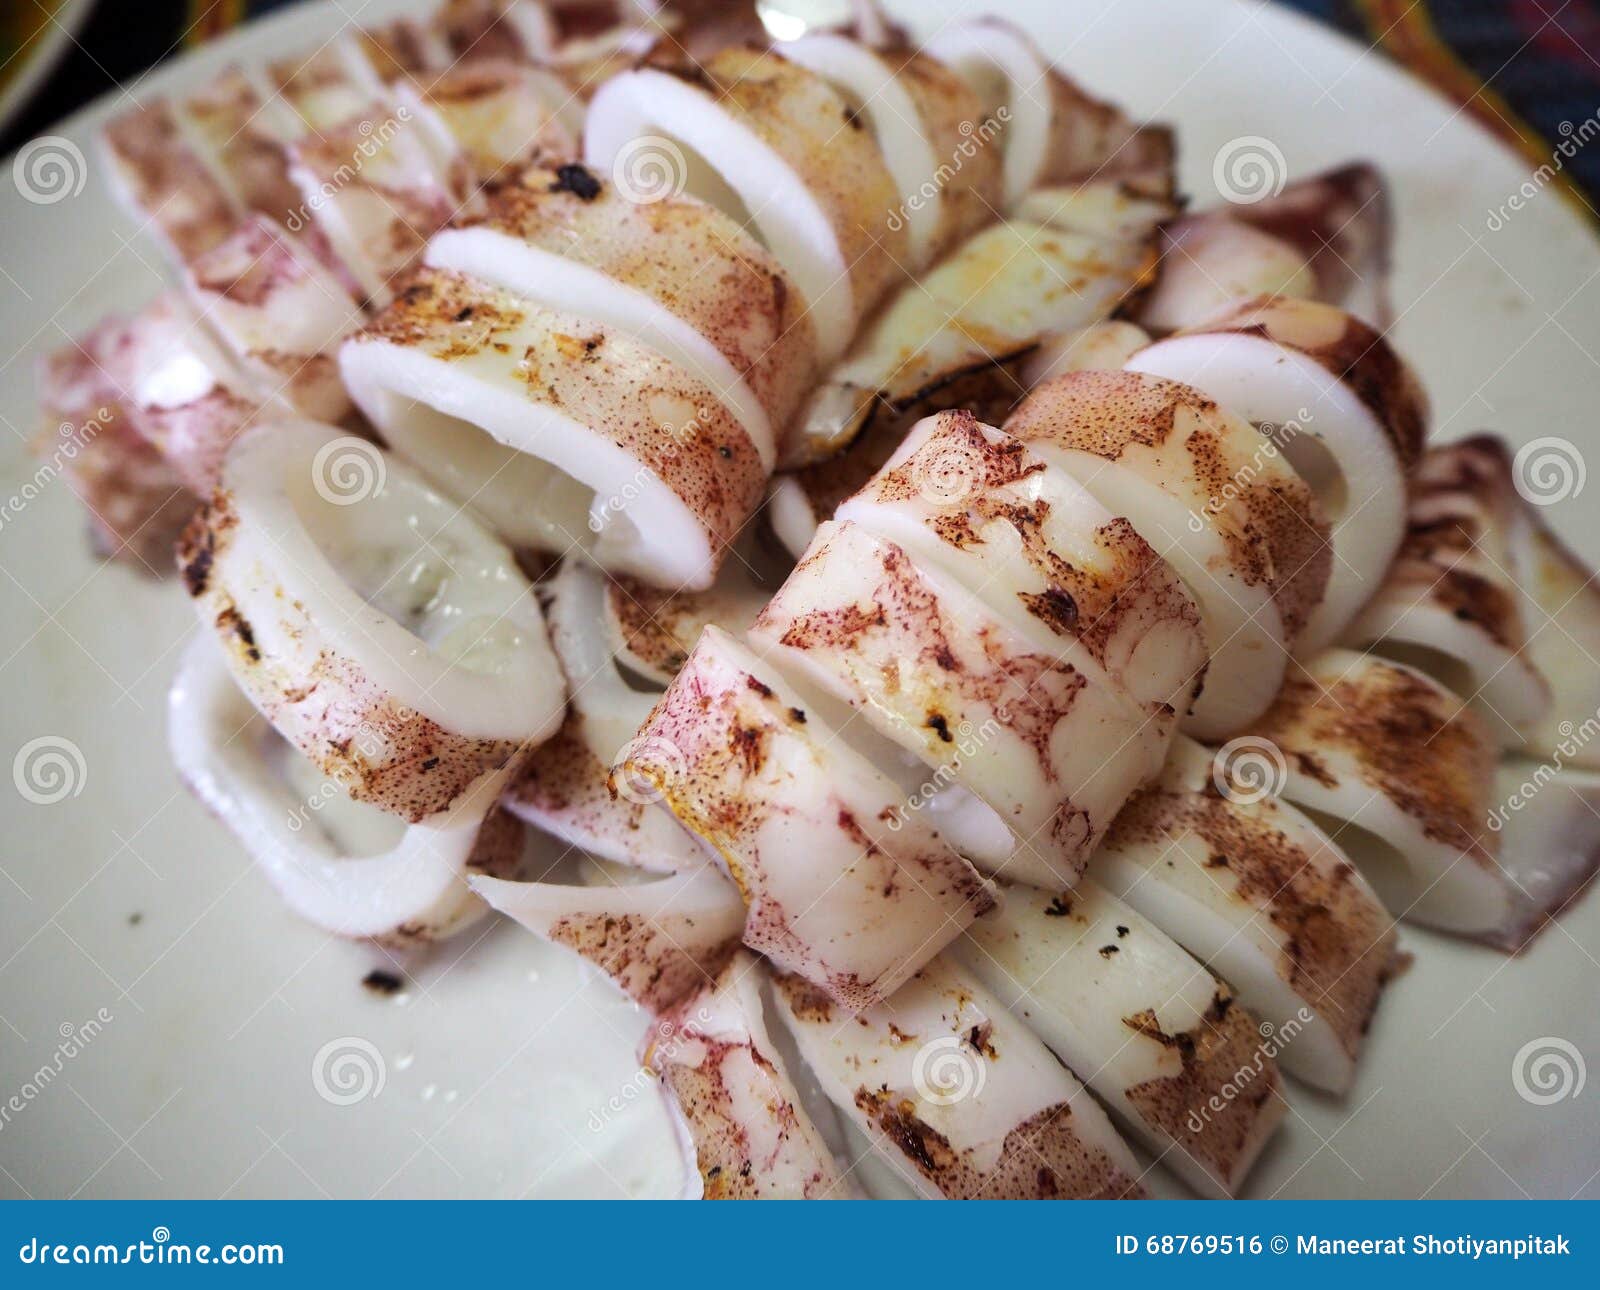 Slice Grilled Squid Thai Seafood Stock Images - Download 188 Royalty